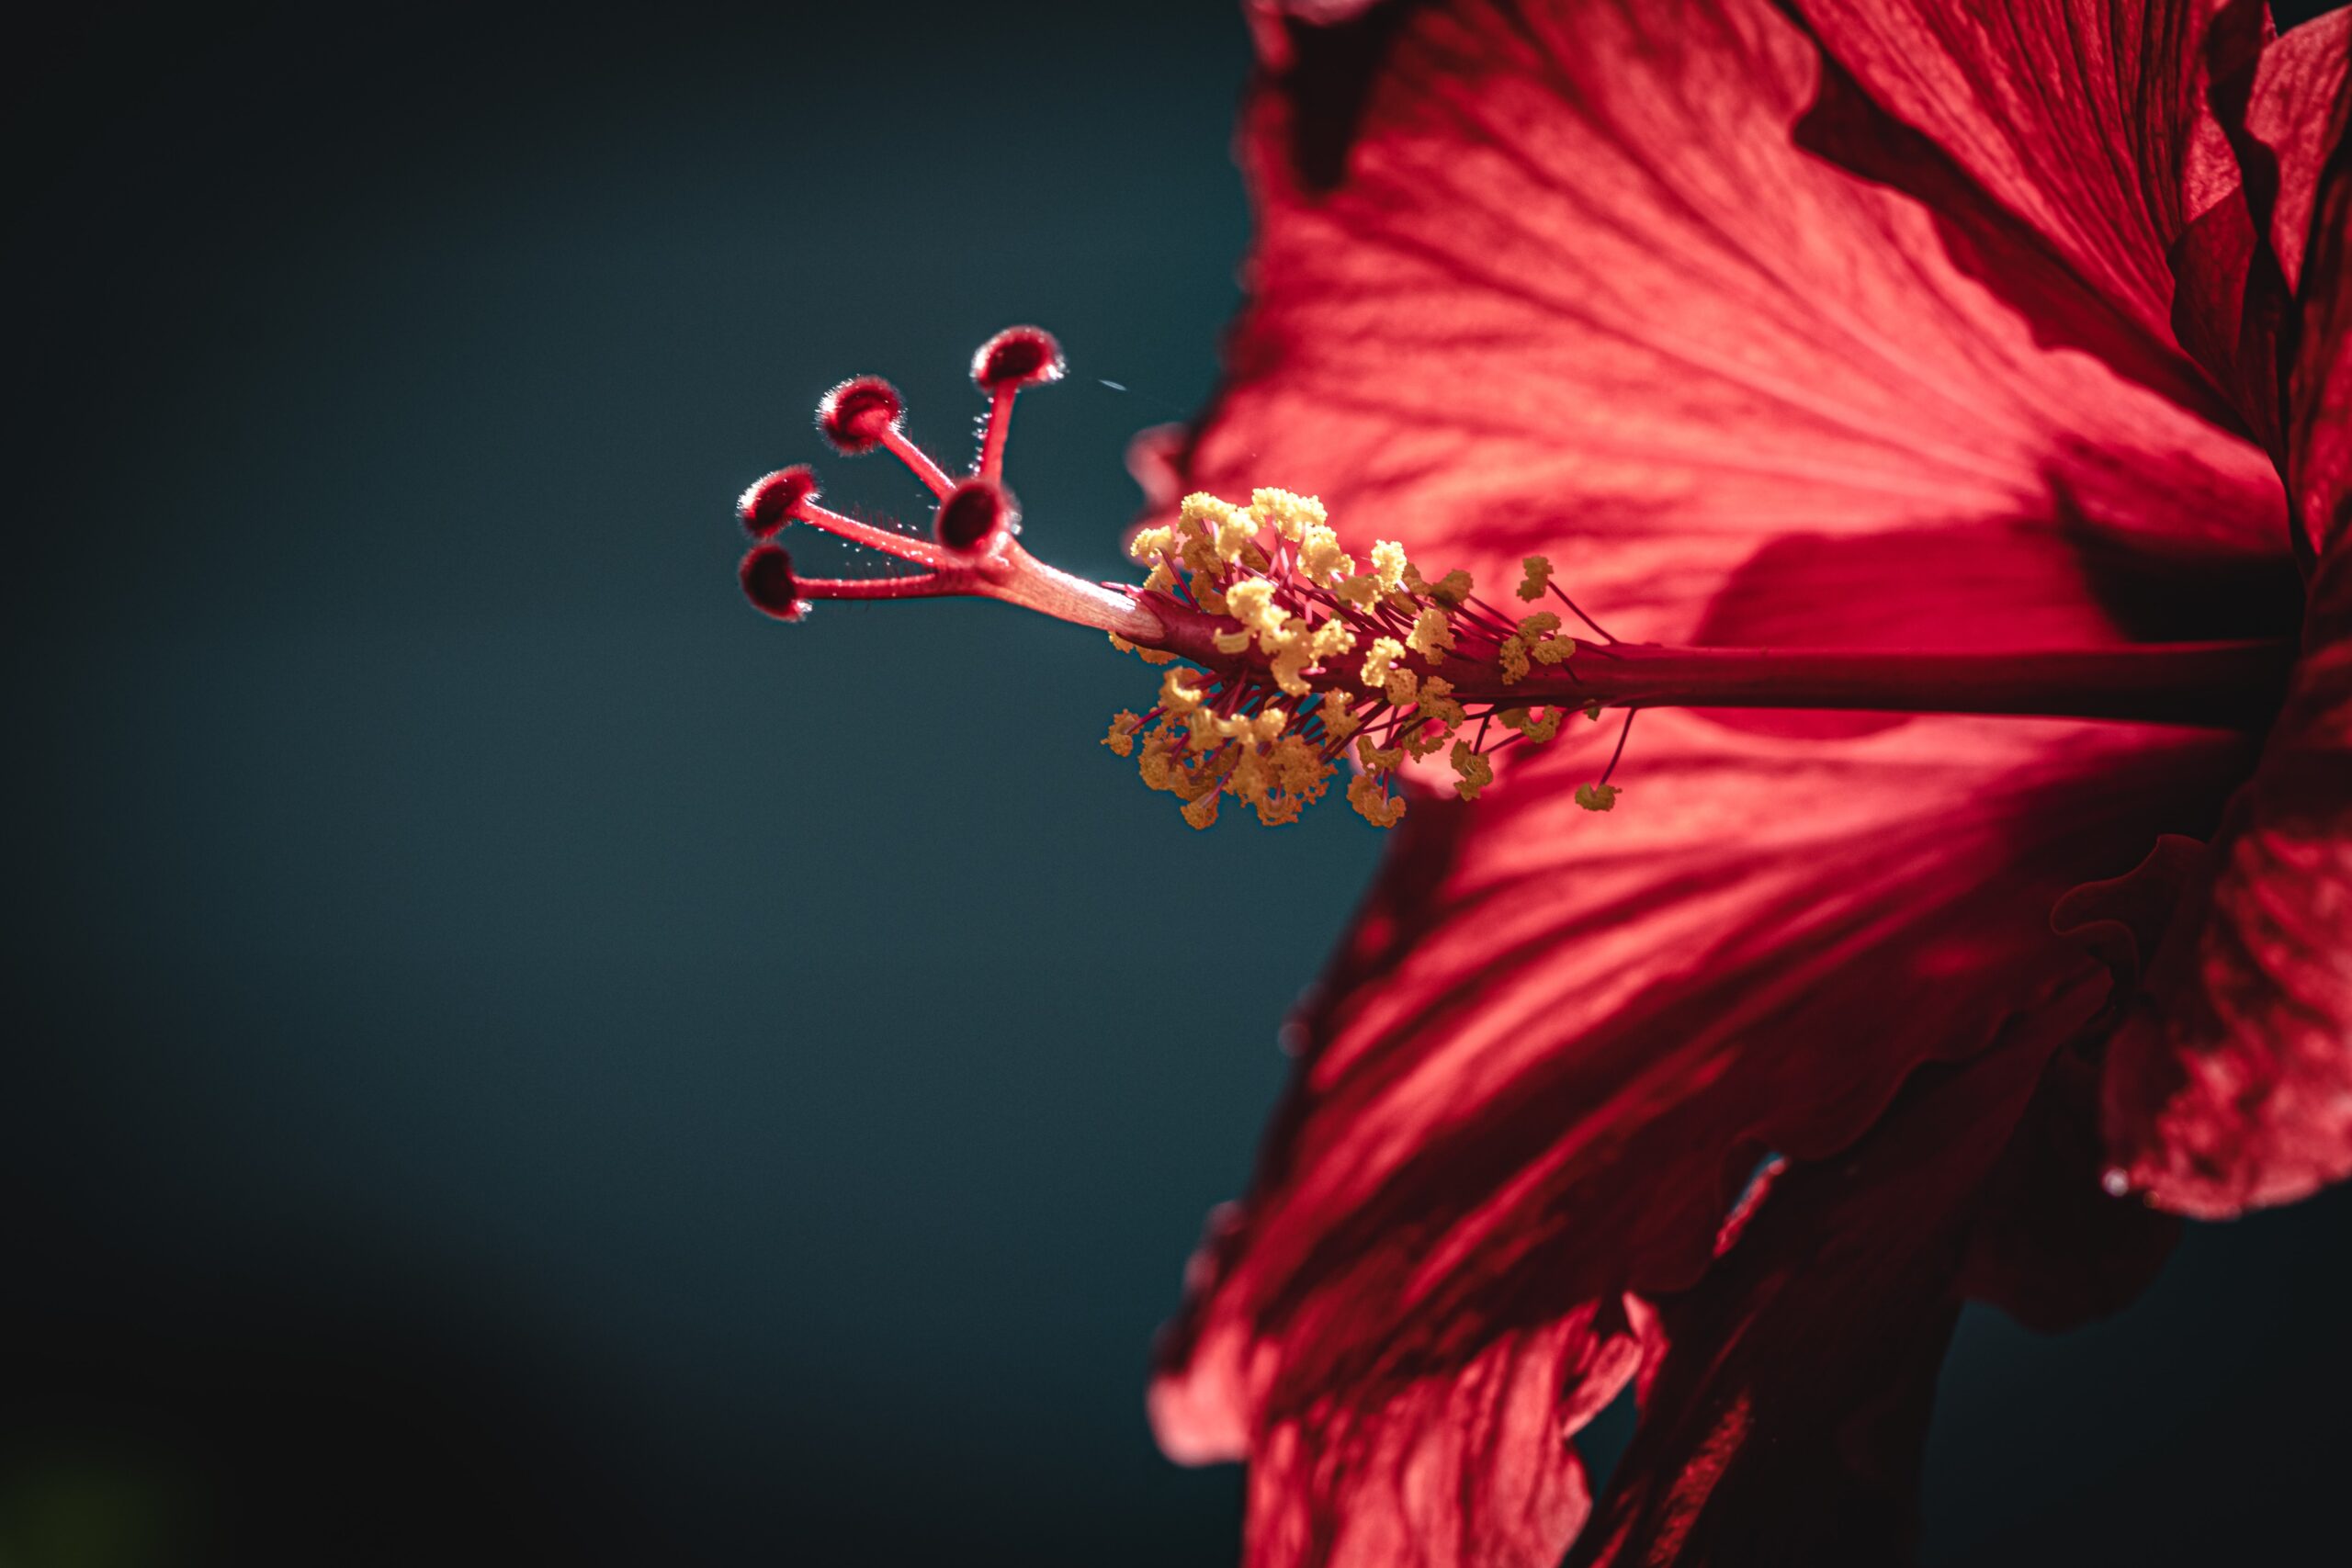 Hibiscus Flower Meaning and Symbolism